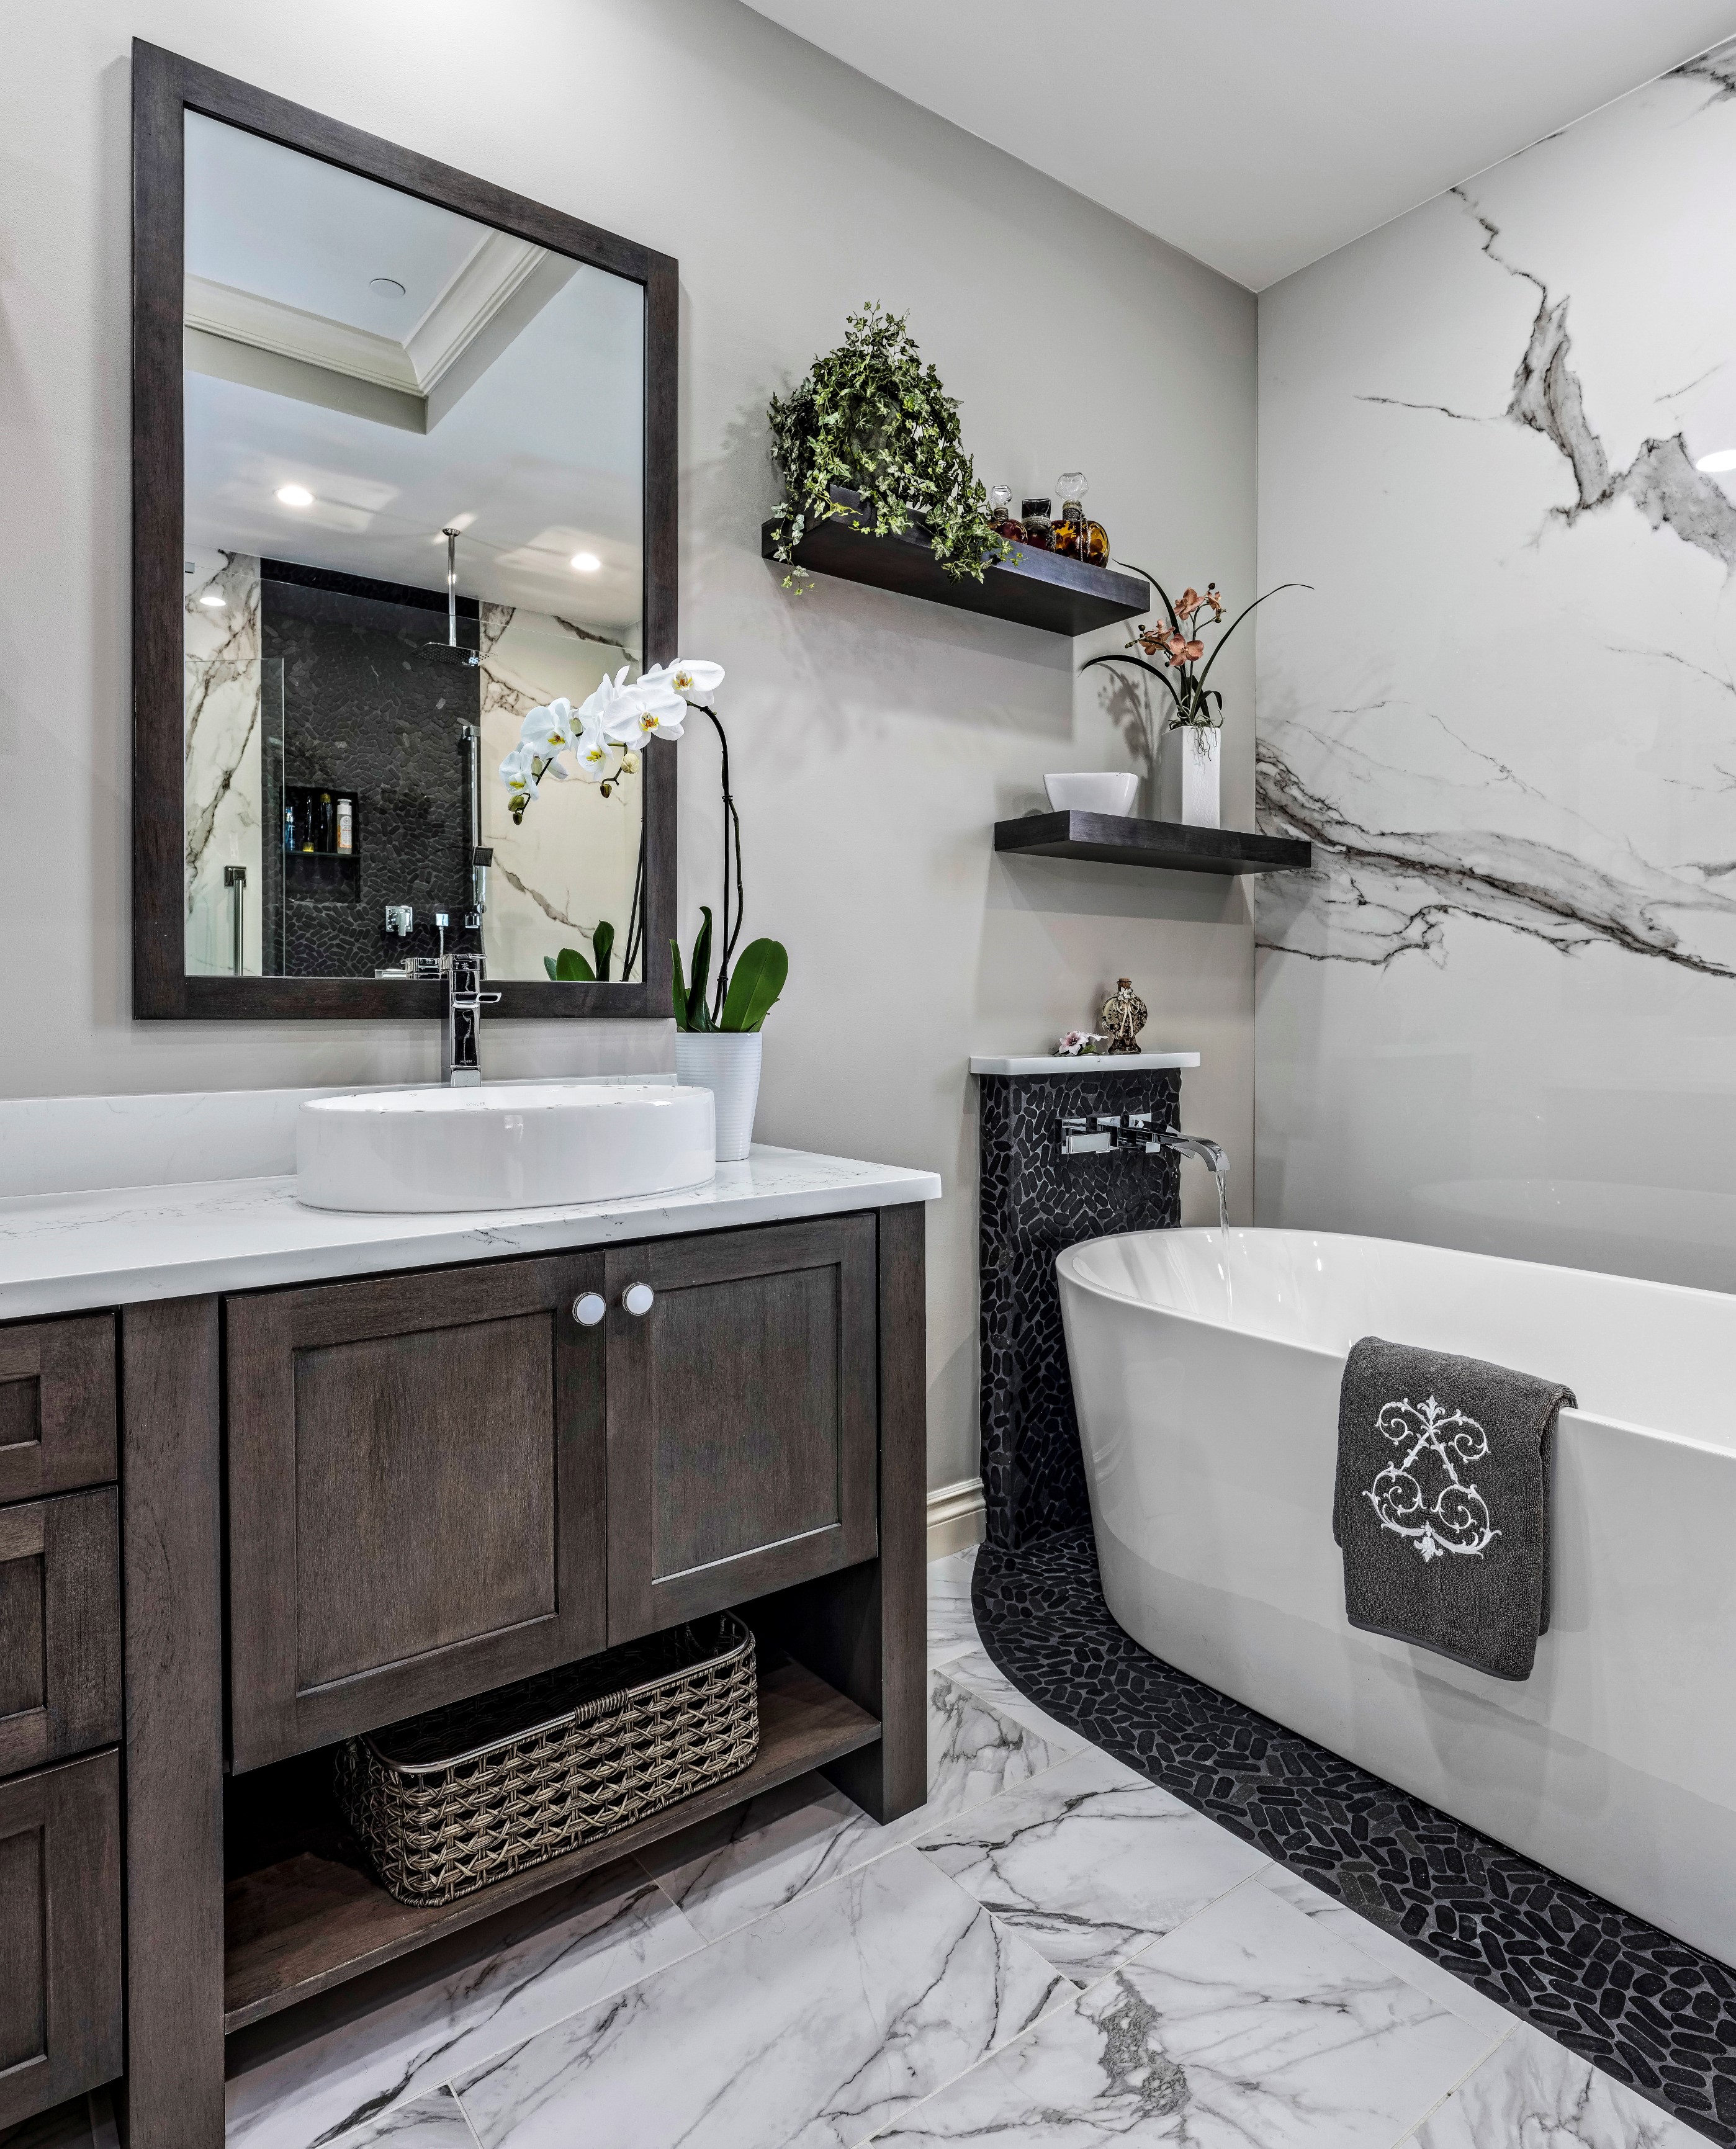 Bathroom Remodeling Typically Cost, How Much Does It Cost To Renovate A Very Small Bathroom